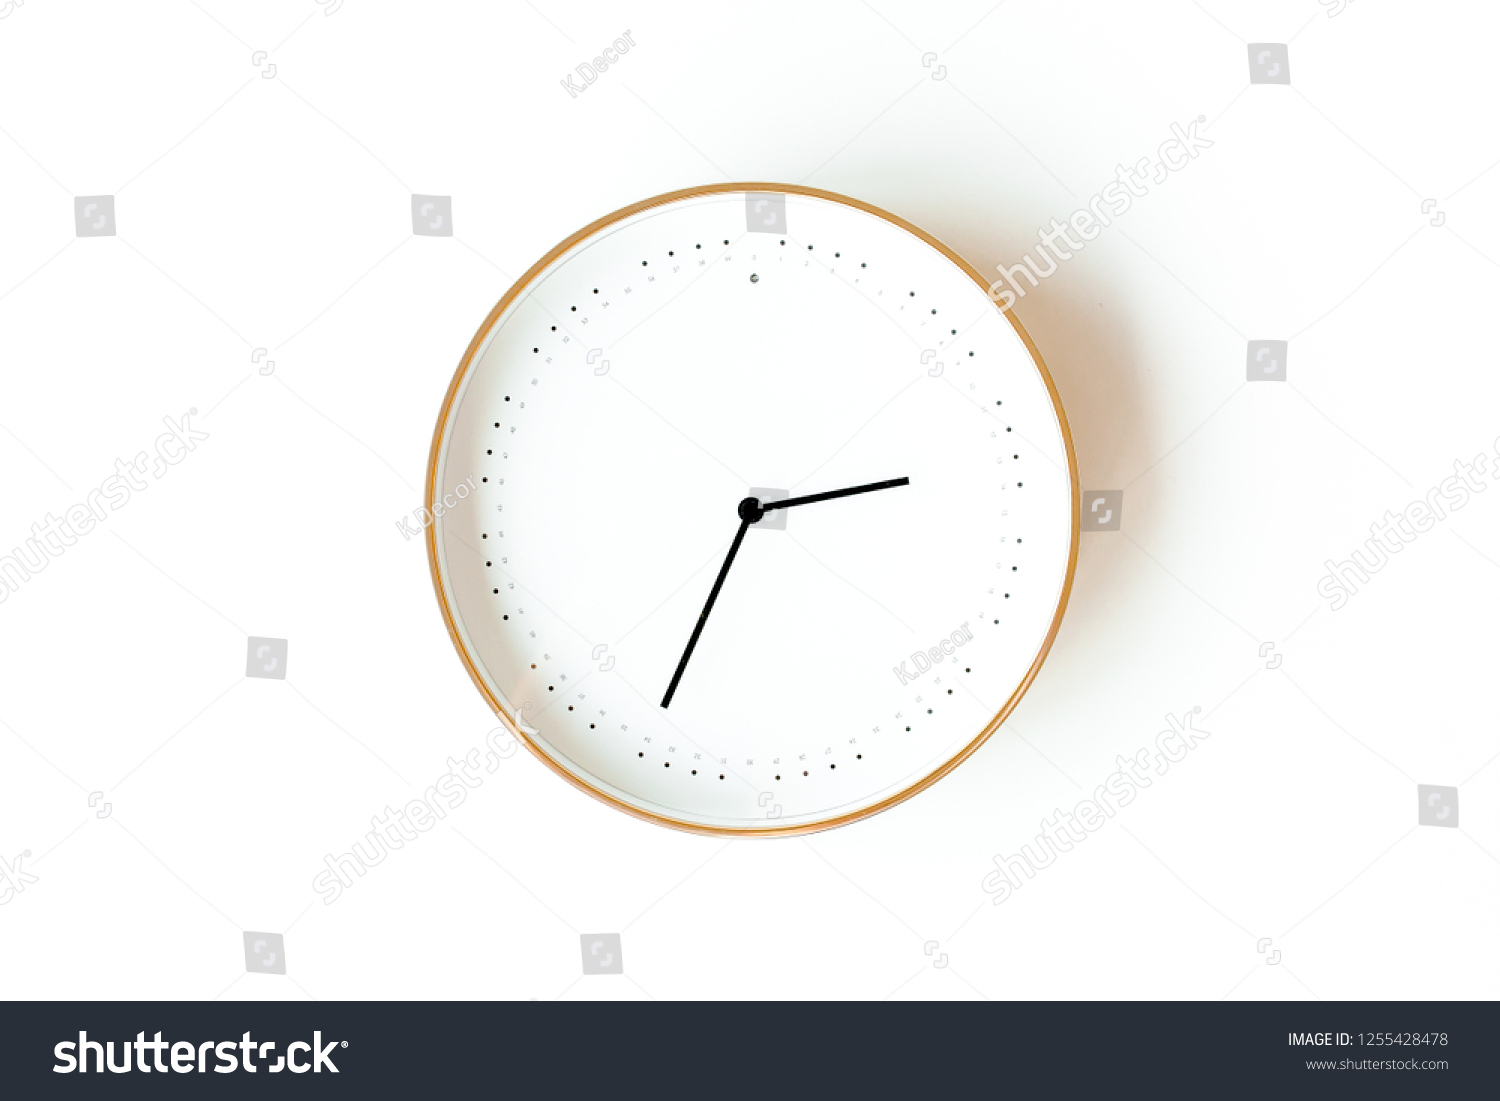 Round clock isolated on white background. Minimal concept. Flat lay. Top view. #1255428478